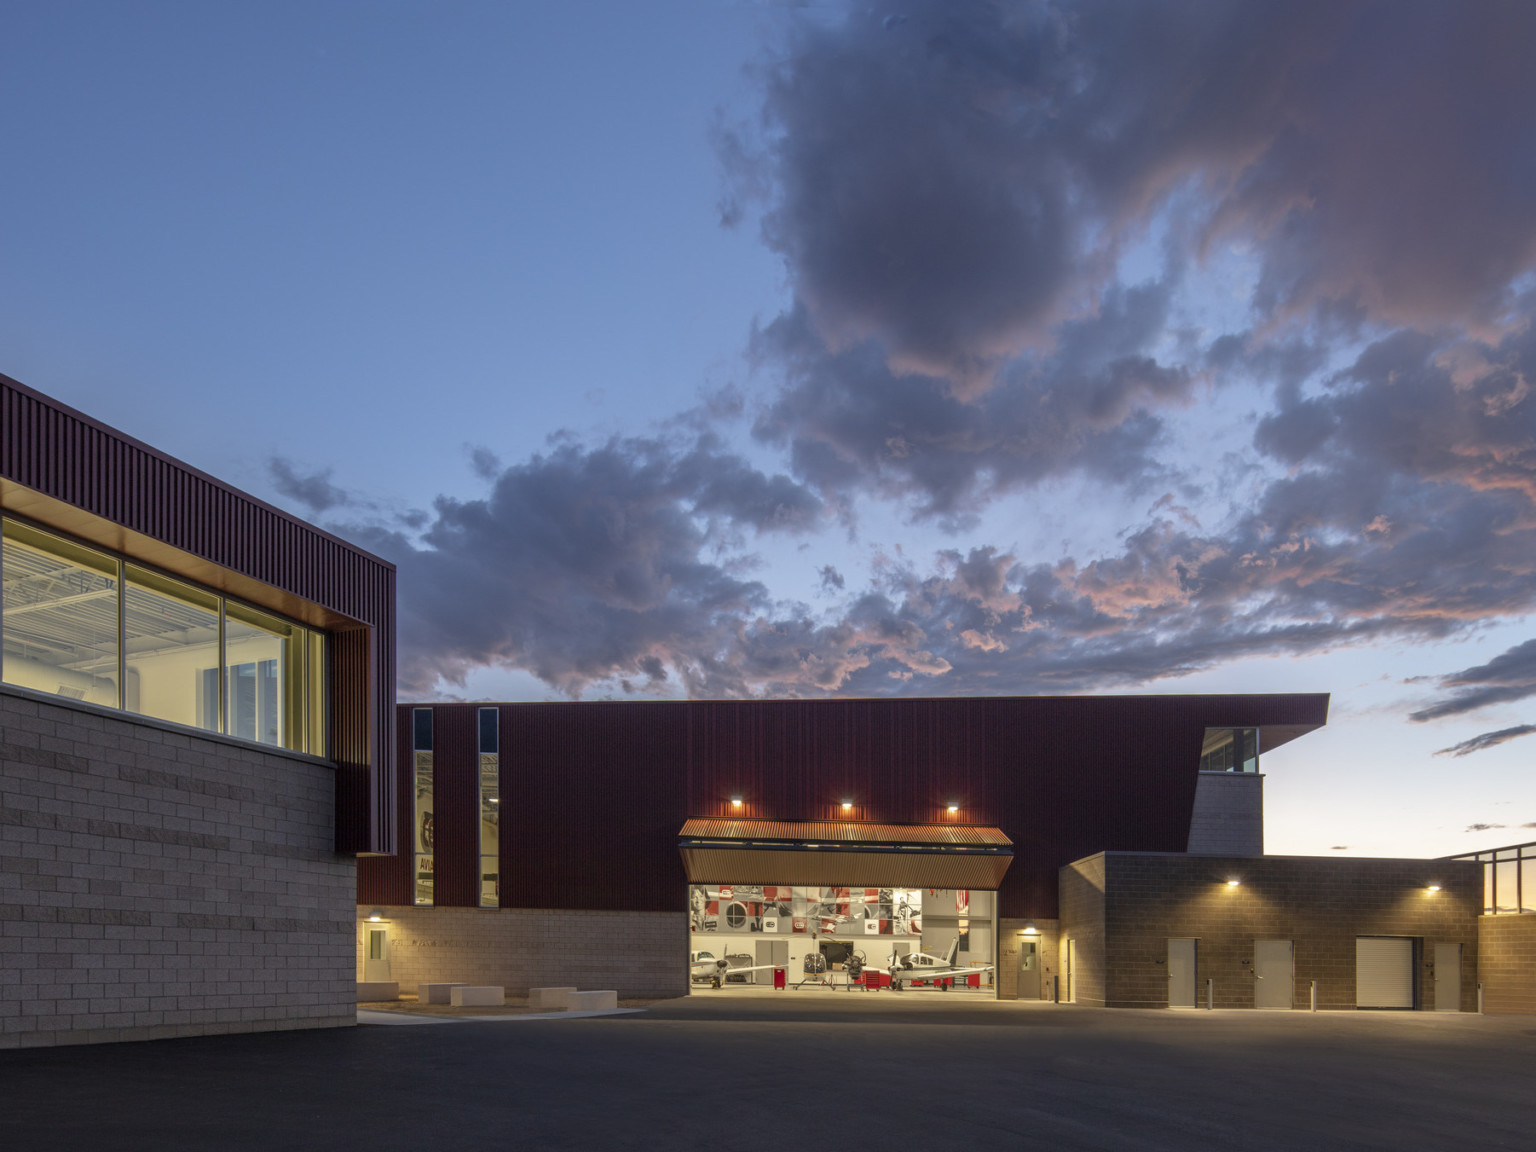 Stone building with textured red wrap facade illuminated from within in evening. Garage door opened at center to airplanes